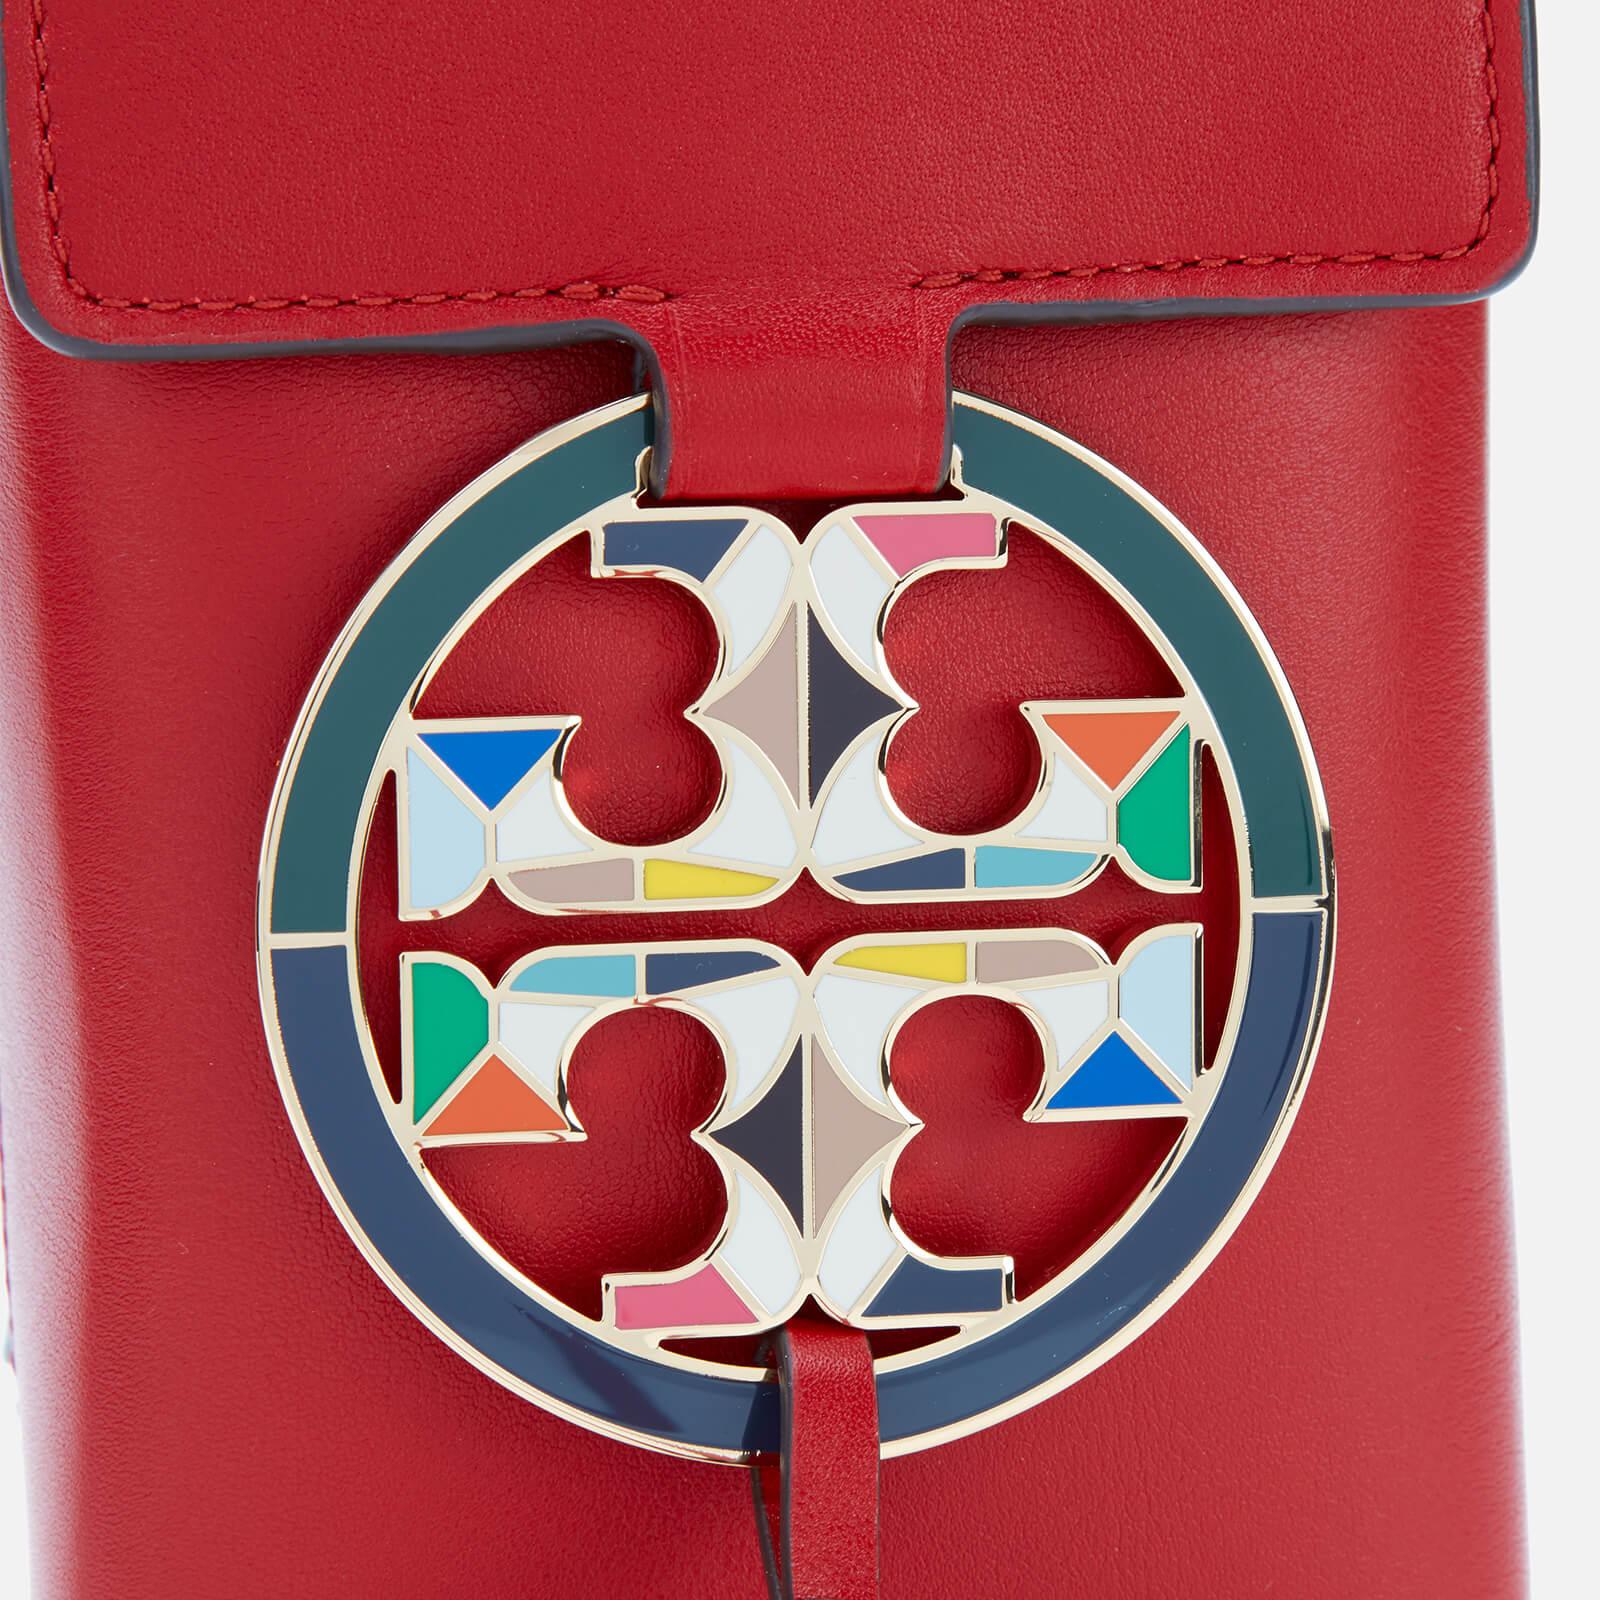 Tory Burch Stained Glass Phone Crossbody